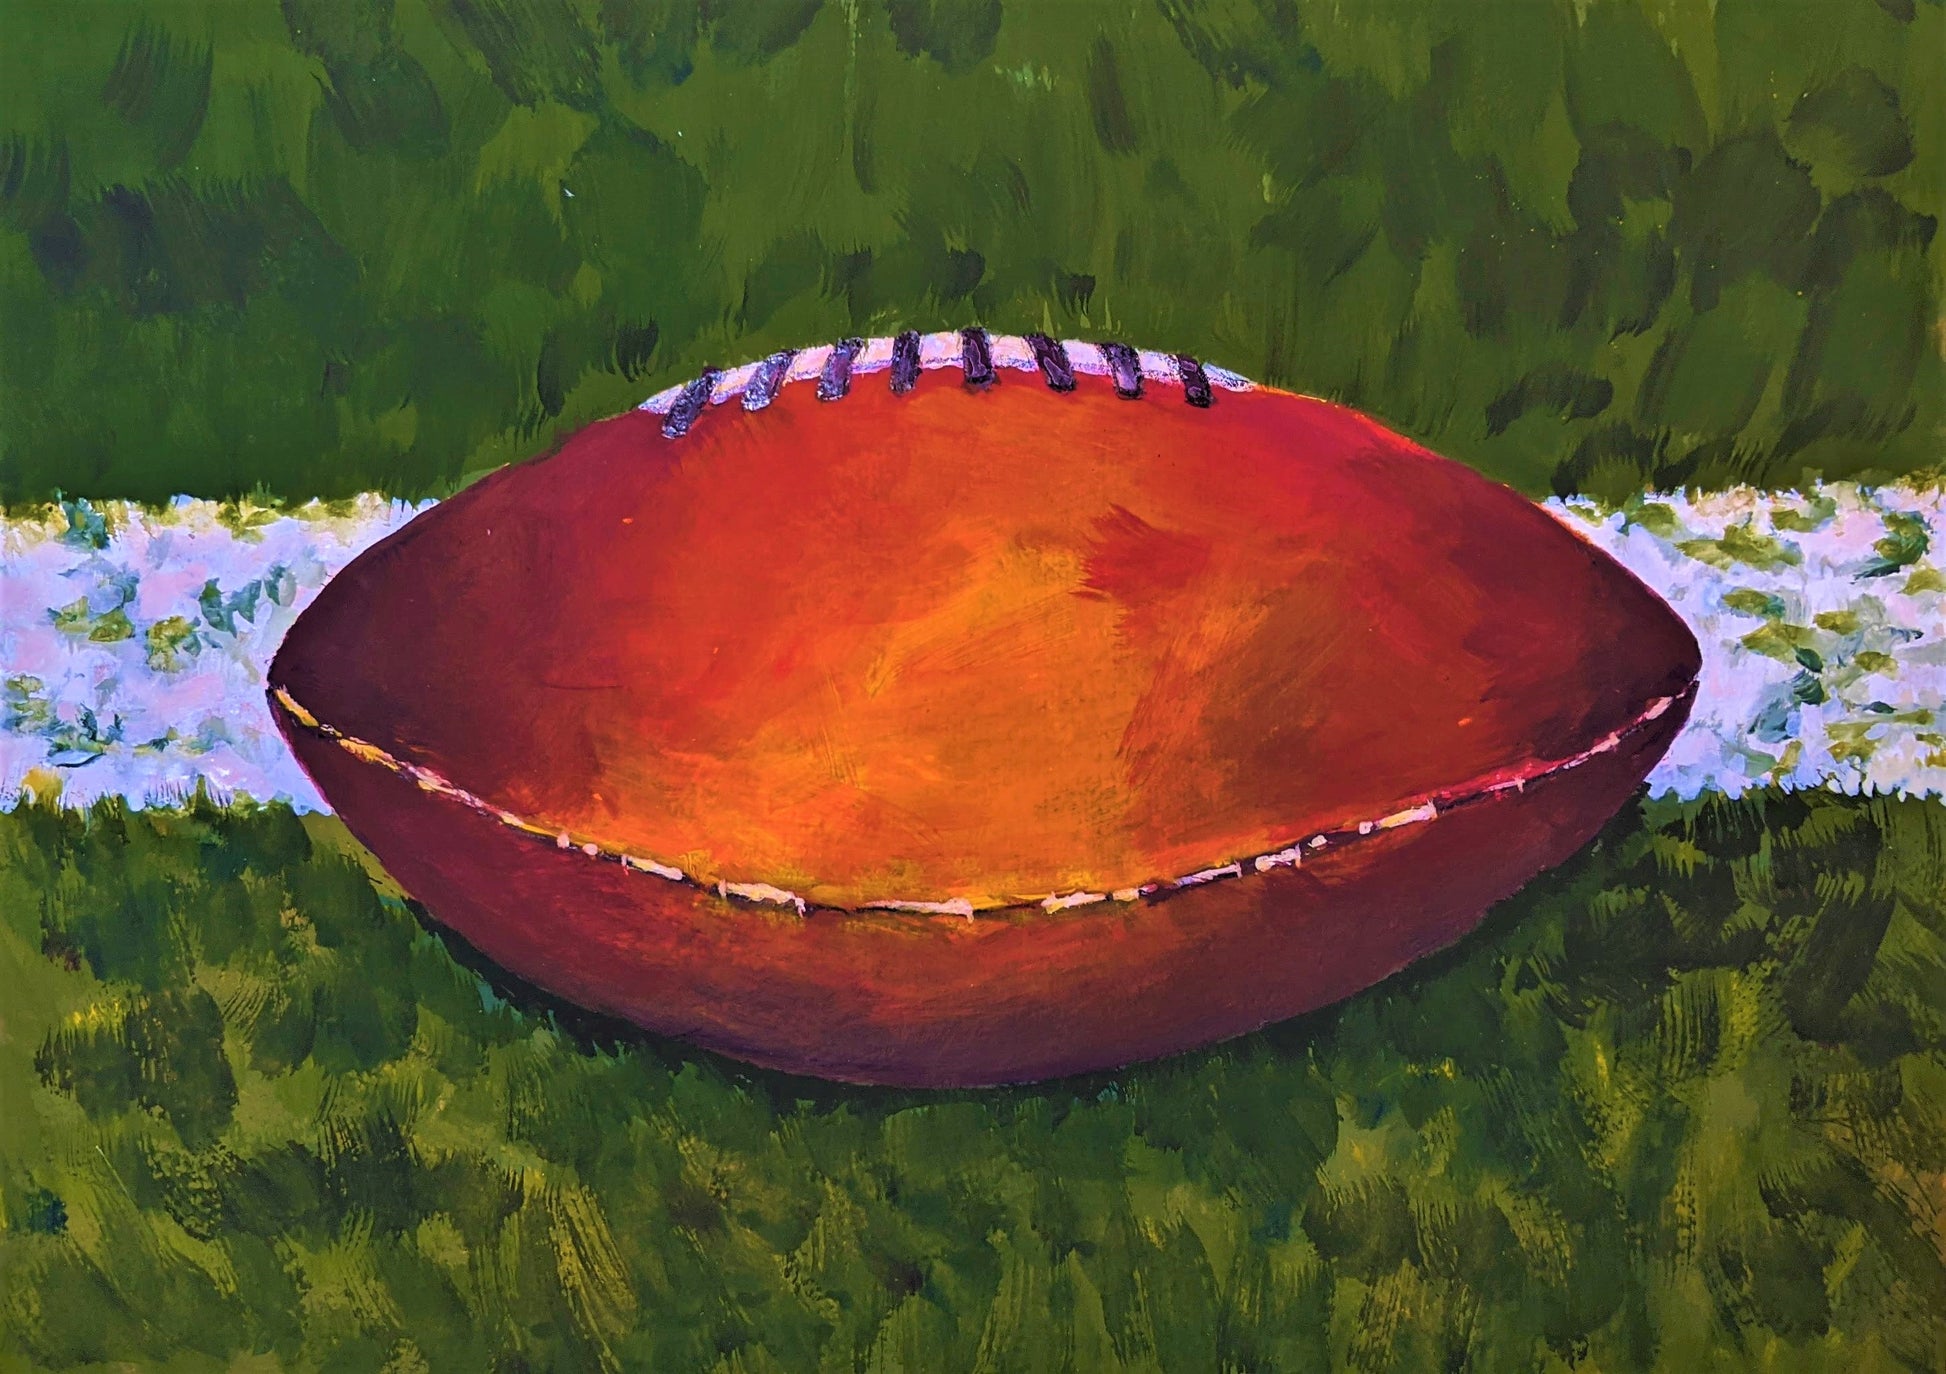 Hike Football acrylic painting on paper